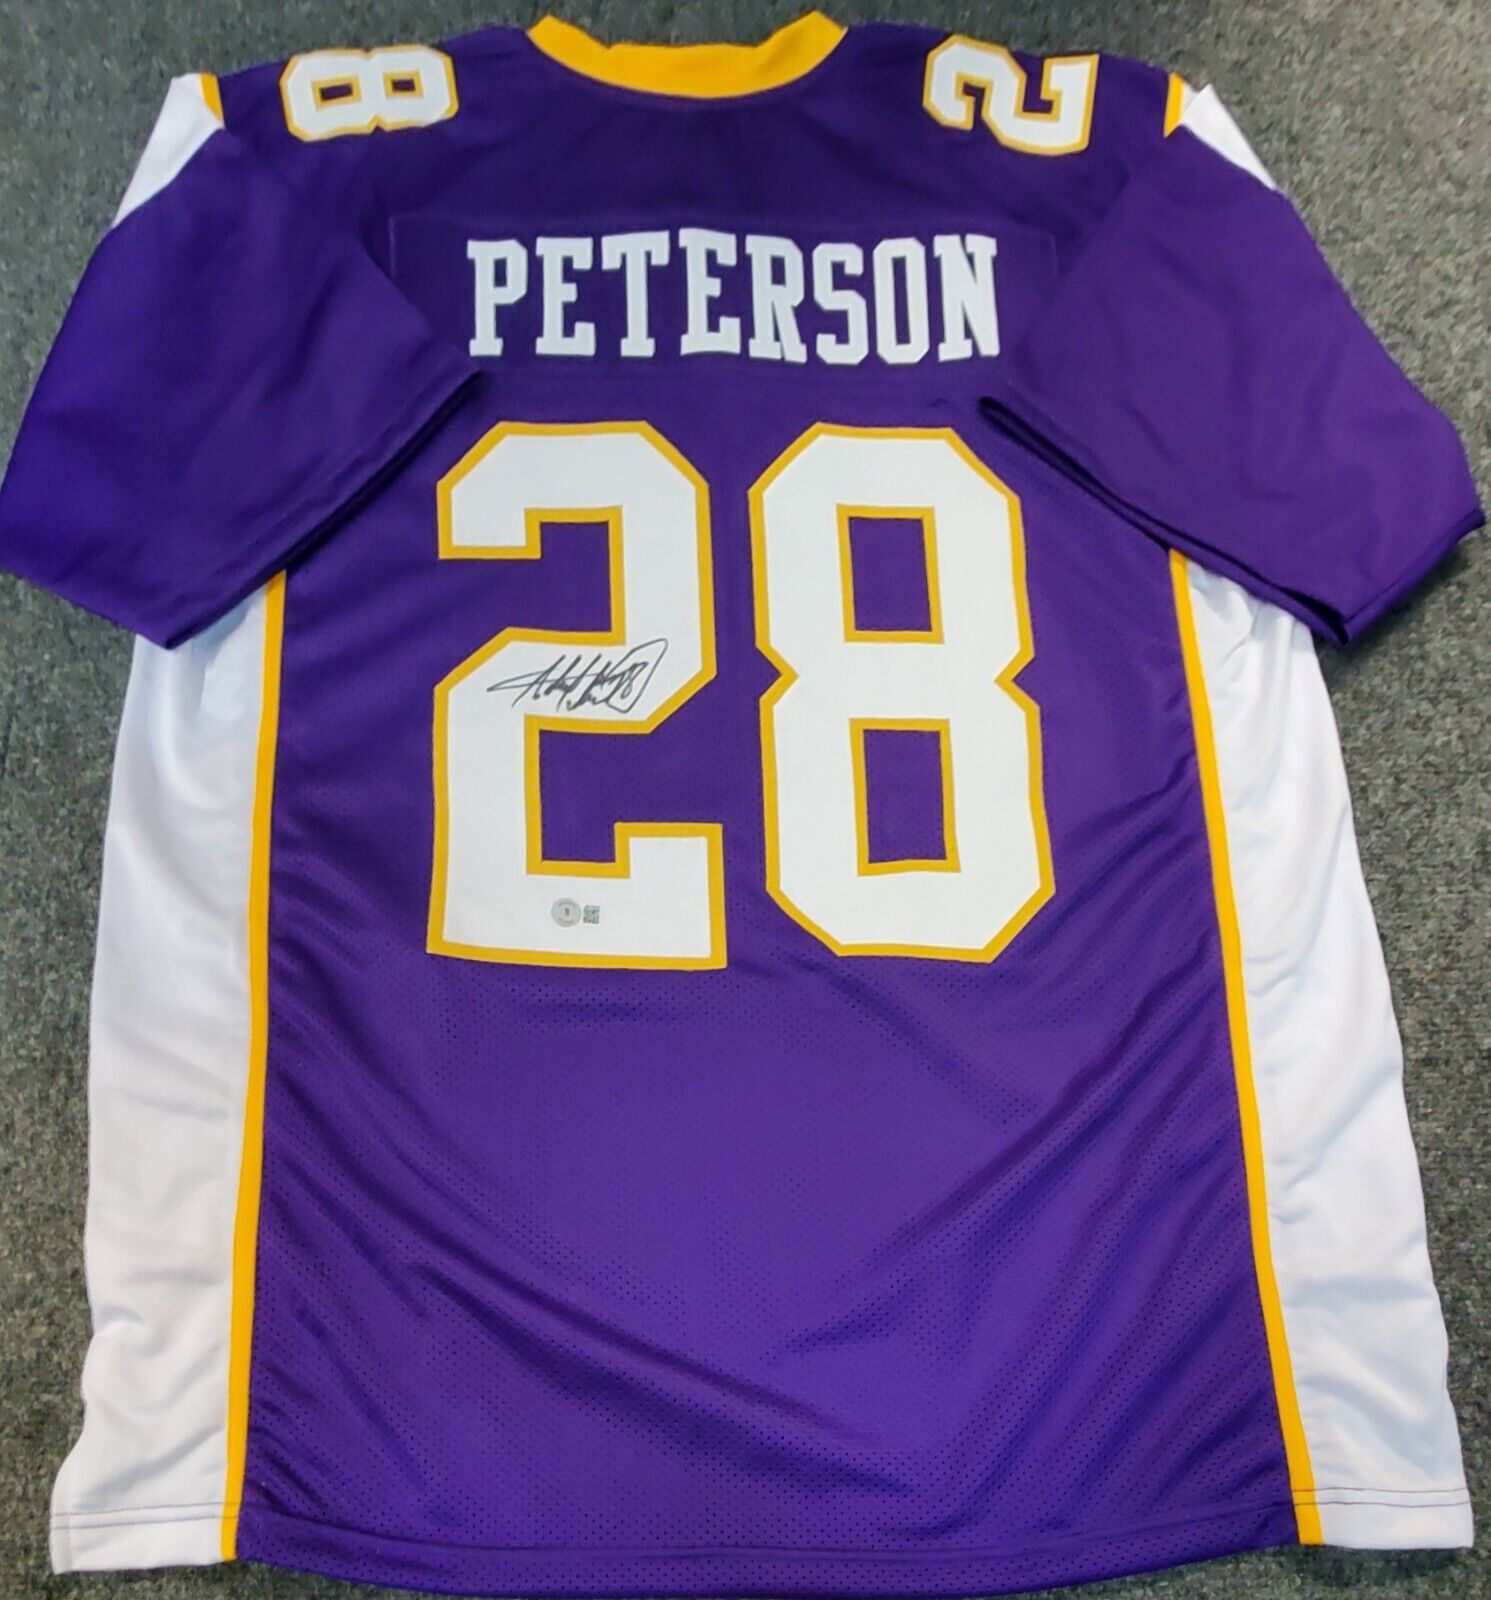 MVP Authentics Minnesota Vikings Adrian Peterson Autographed Signed Jersey Beckett Holo 225 sports jersey framing , jersey framing